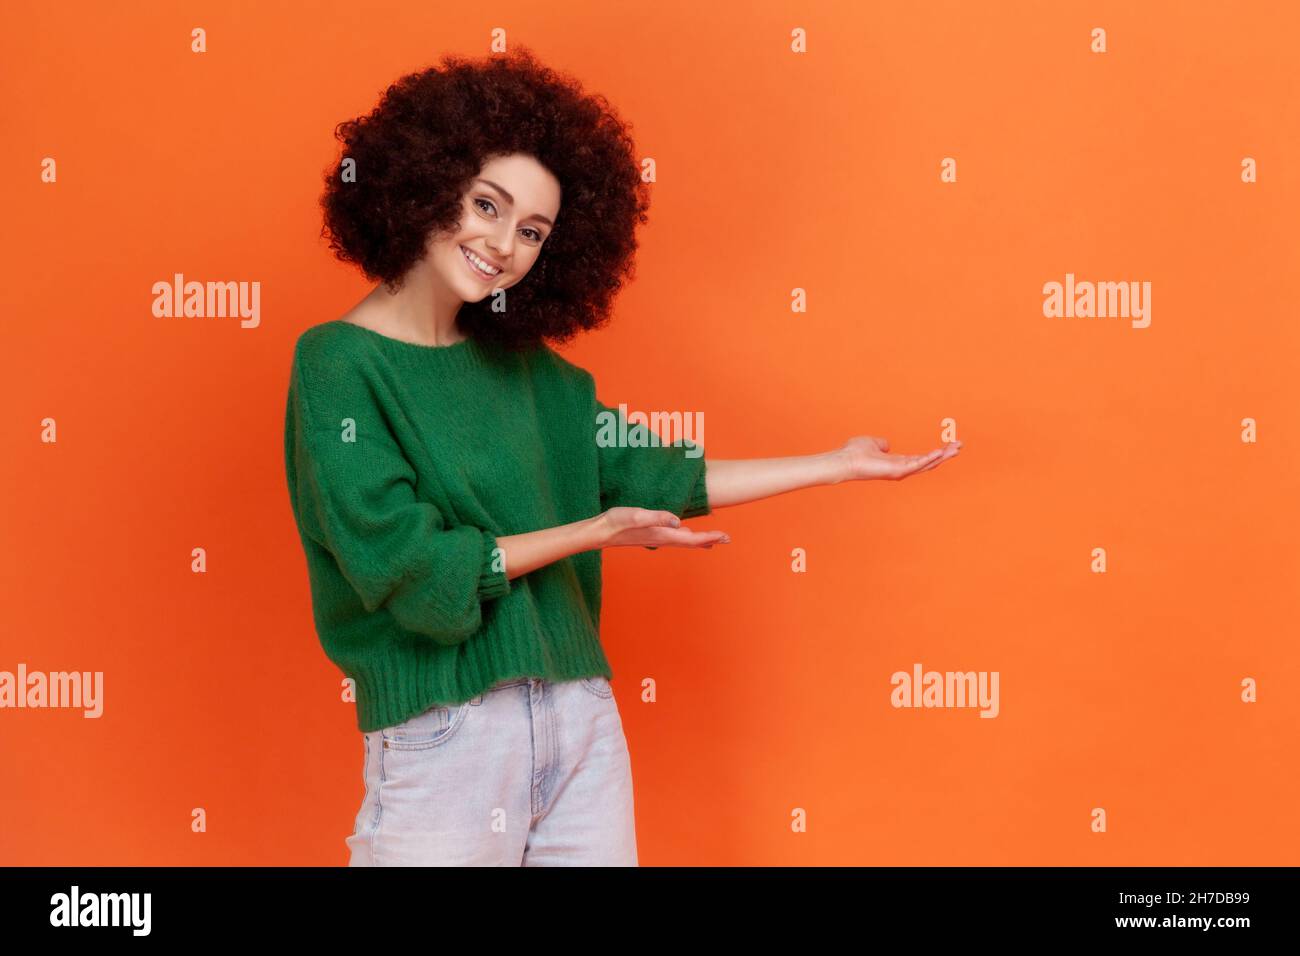 Happy friendly woman with Afro hairstyle wearing green casual style sweater presenting advertising area with toothy smile, copy space. Indoor studio shot isolated on orange background. Stock Photo